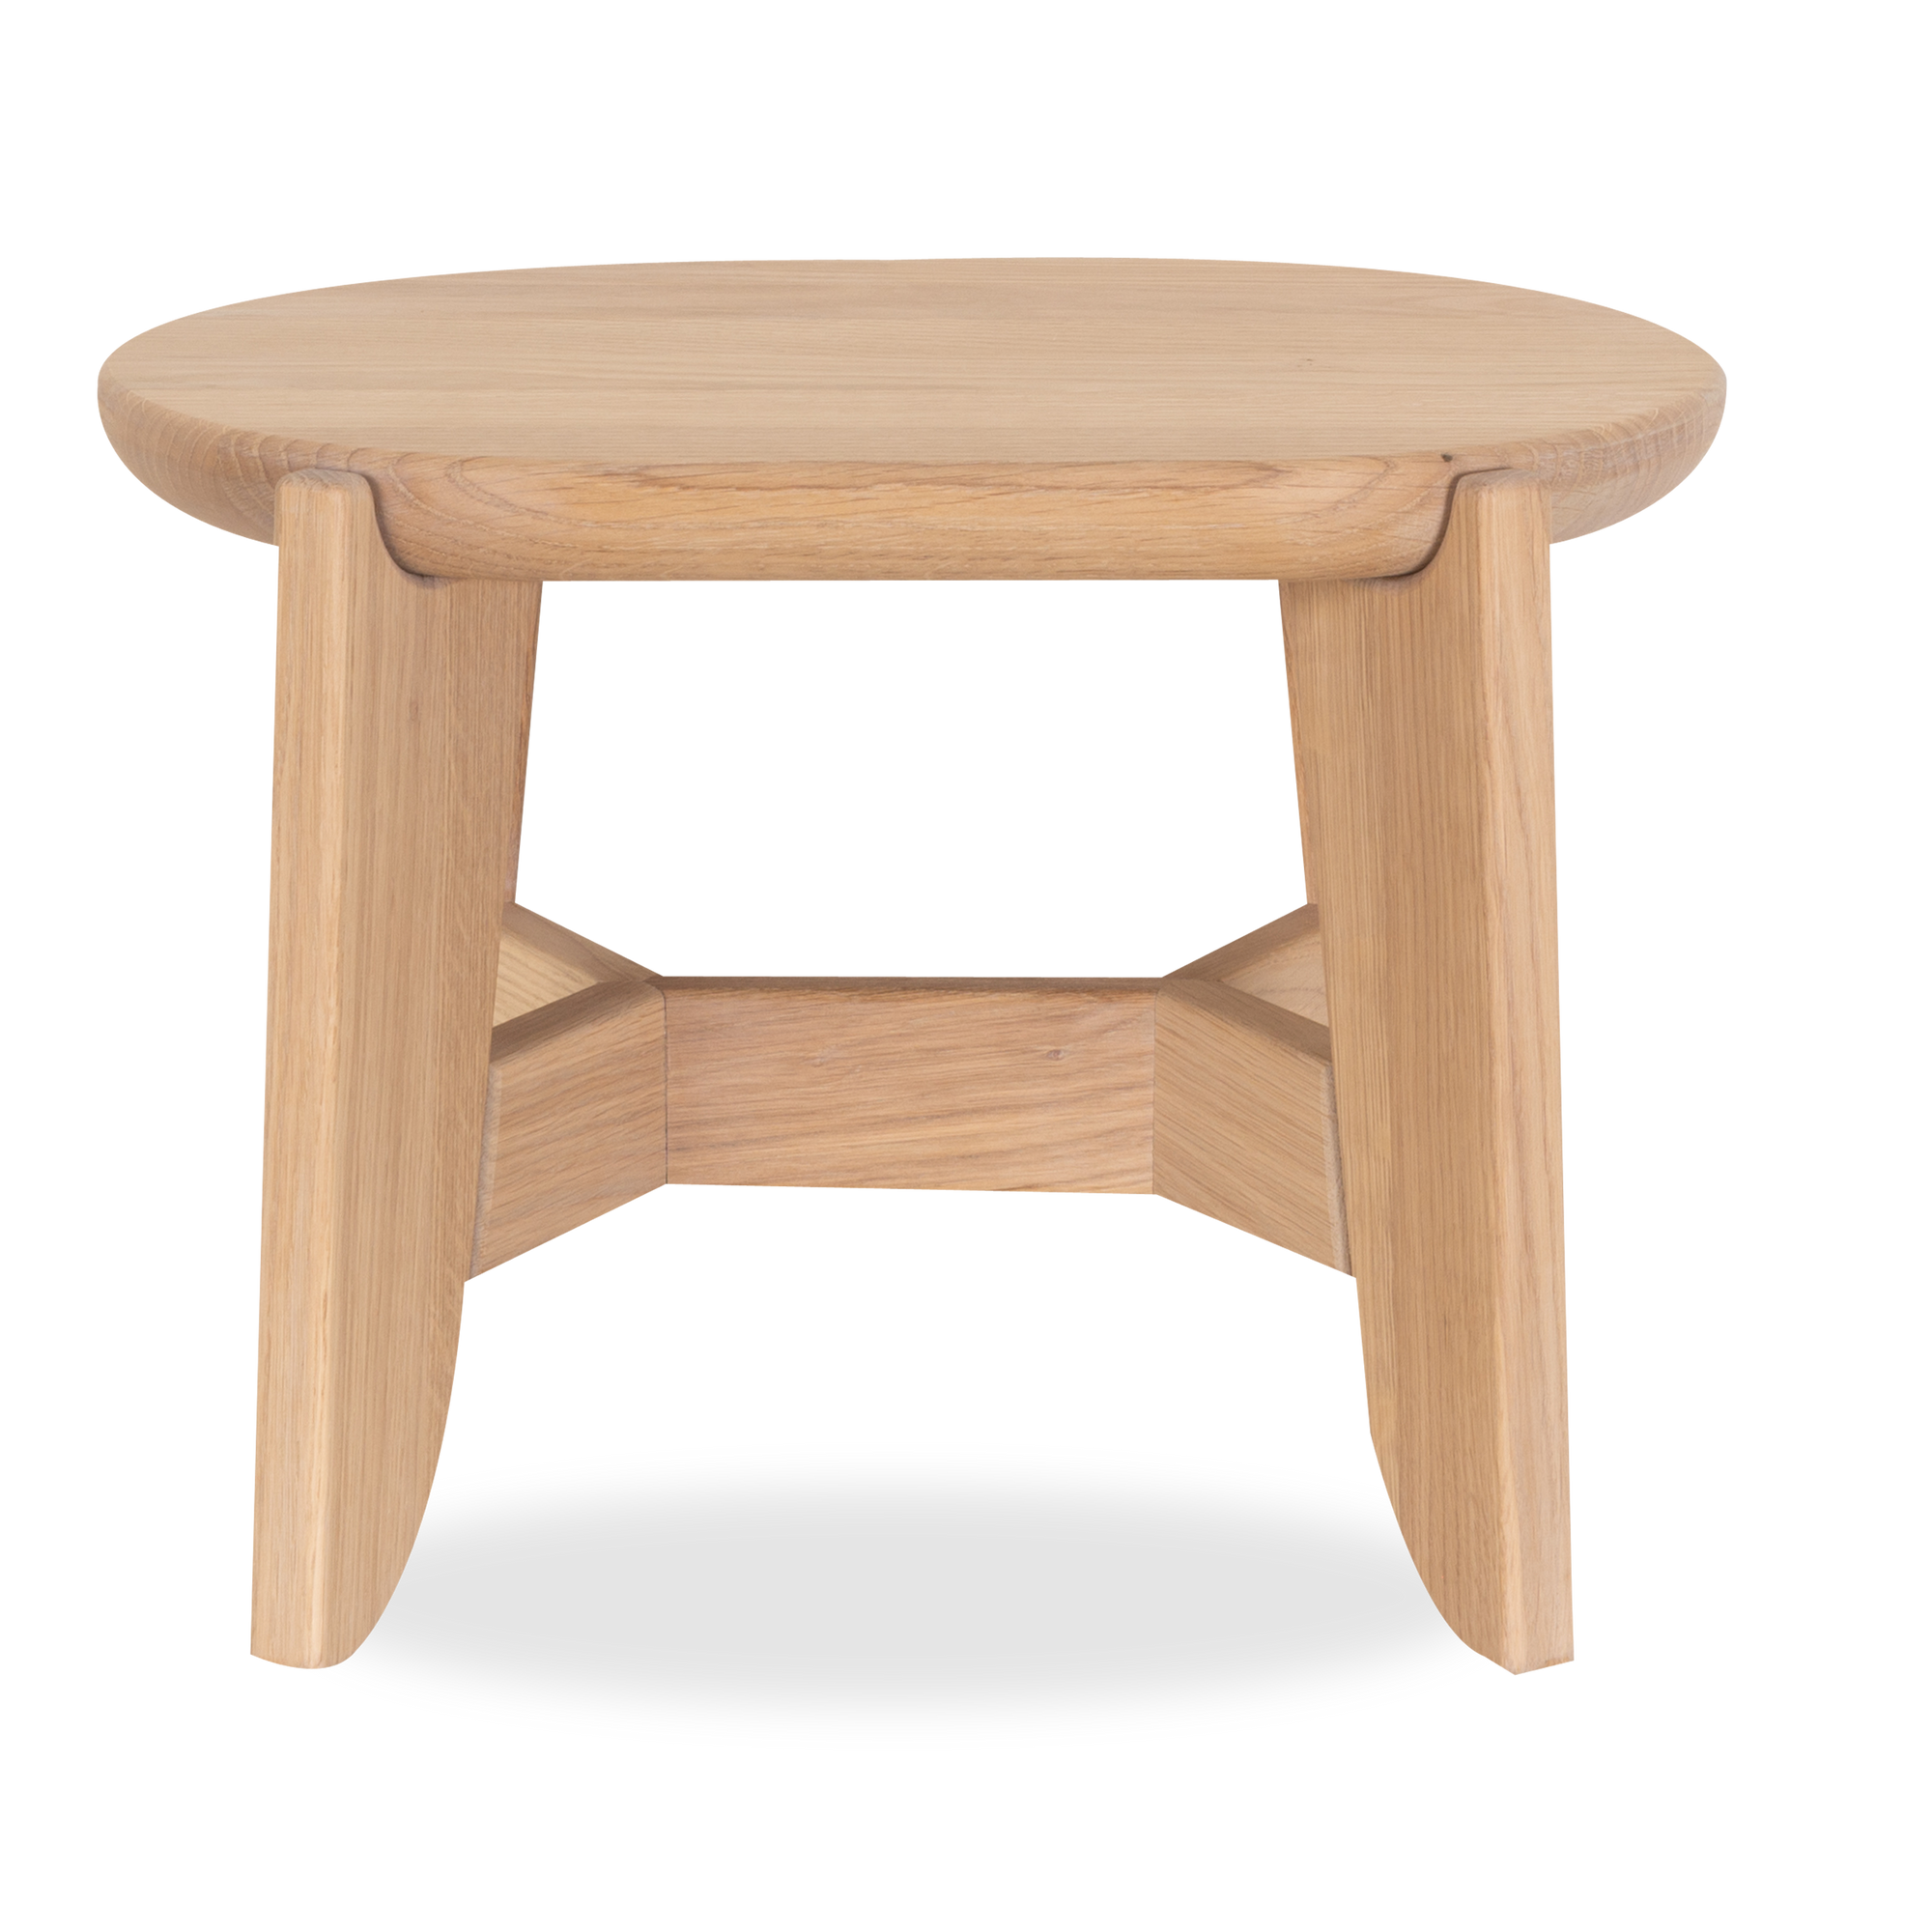 This step stool is solidly constructed with rounded edges and shapes that gives it a modern appearance.